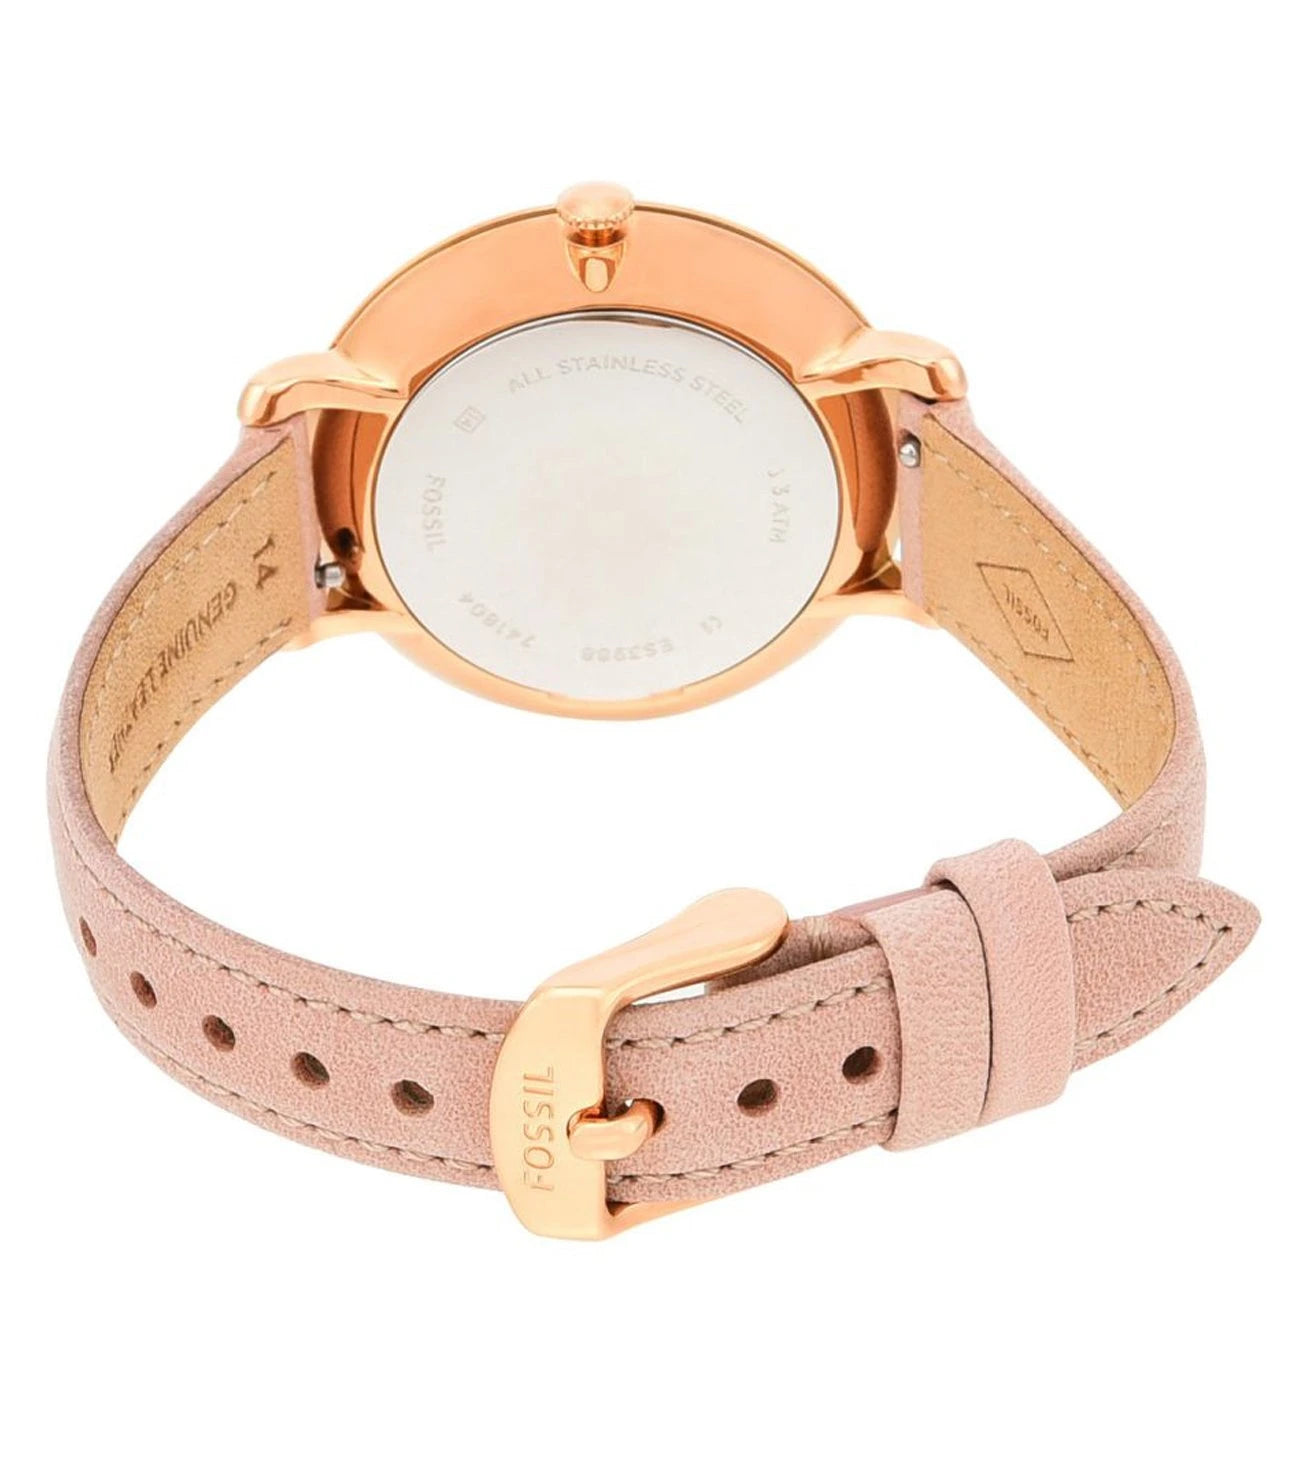 ES3988 | FOSSIL Jacqueline Analog Watch for Women